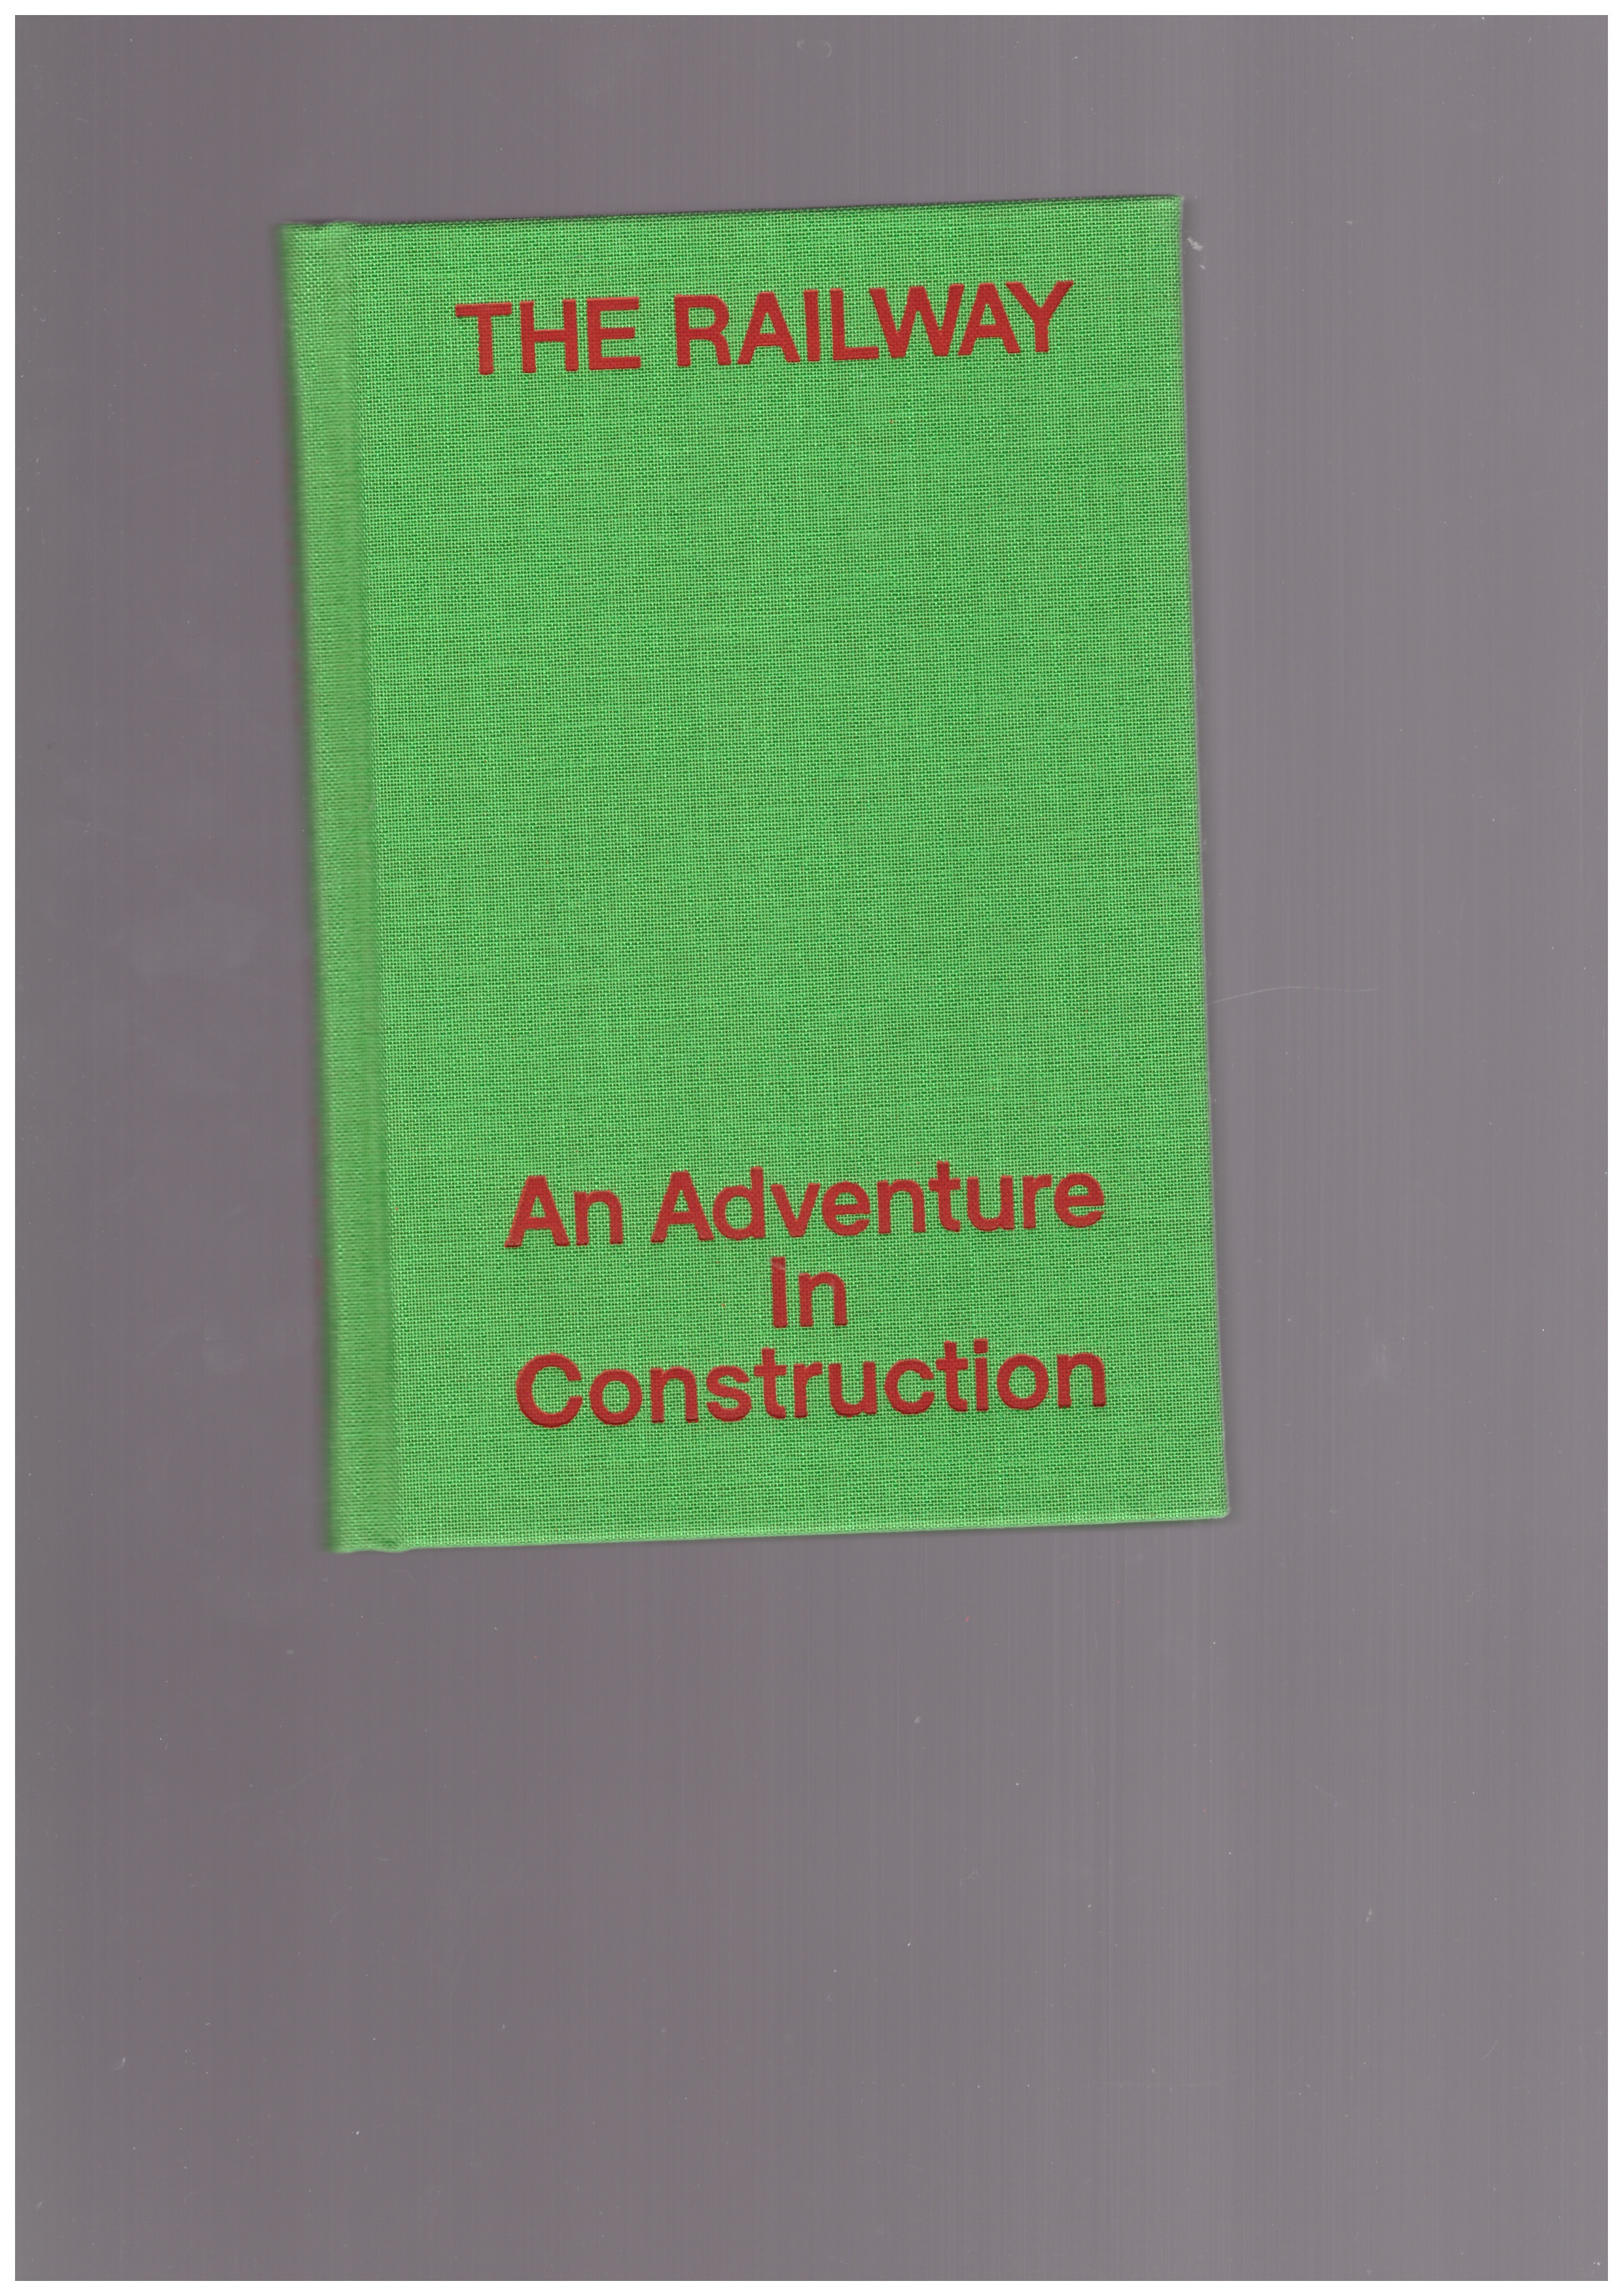 THOMPSON, E. P.; SALE, Dorothy; KLINGENDER, F. D.; WORSLEY, Peter   - The Railway - An Adventure in Construction